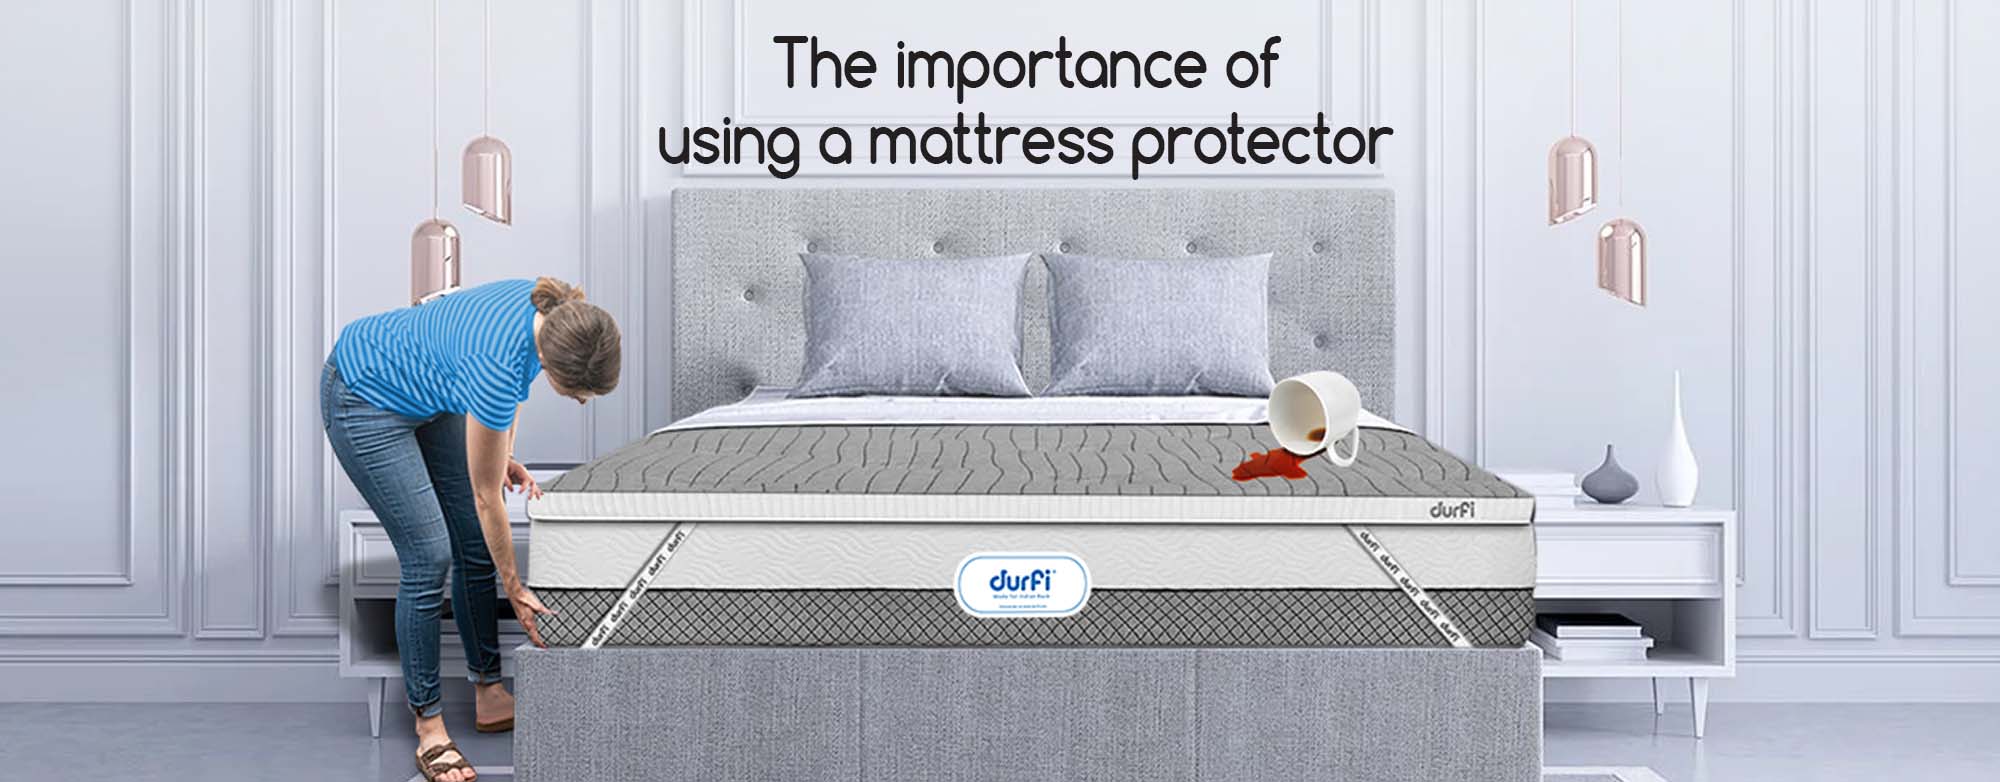 importance of a mattress protector